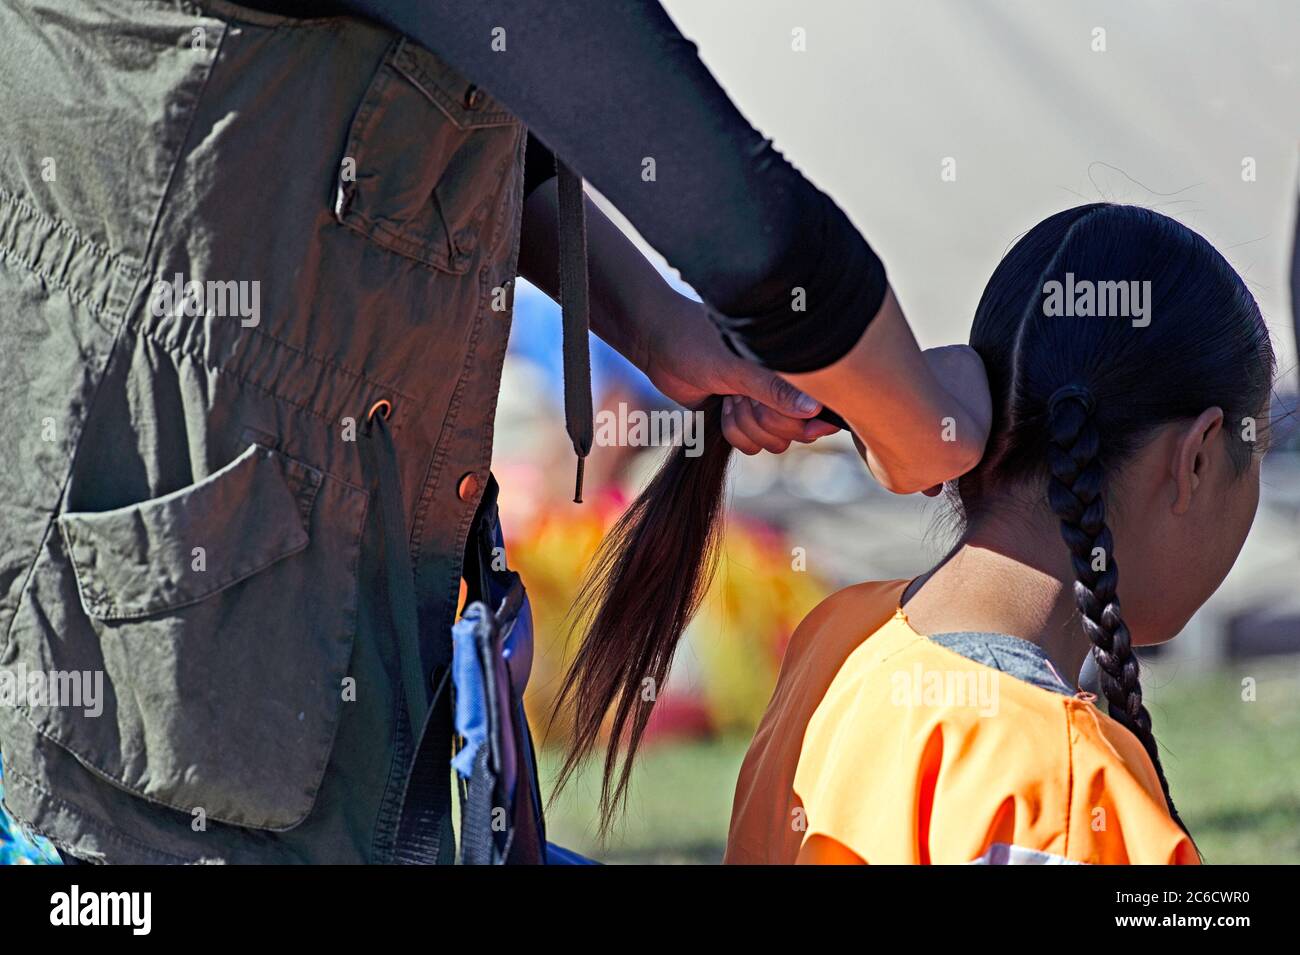 A young girl getting her hair braided at the Tsuut'ina Nation Powwow, Bragg Creek Alberta Canada Stock Photo